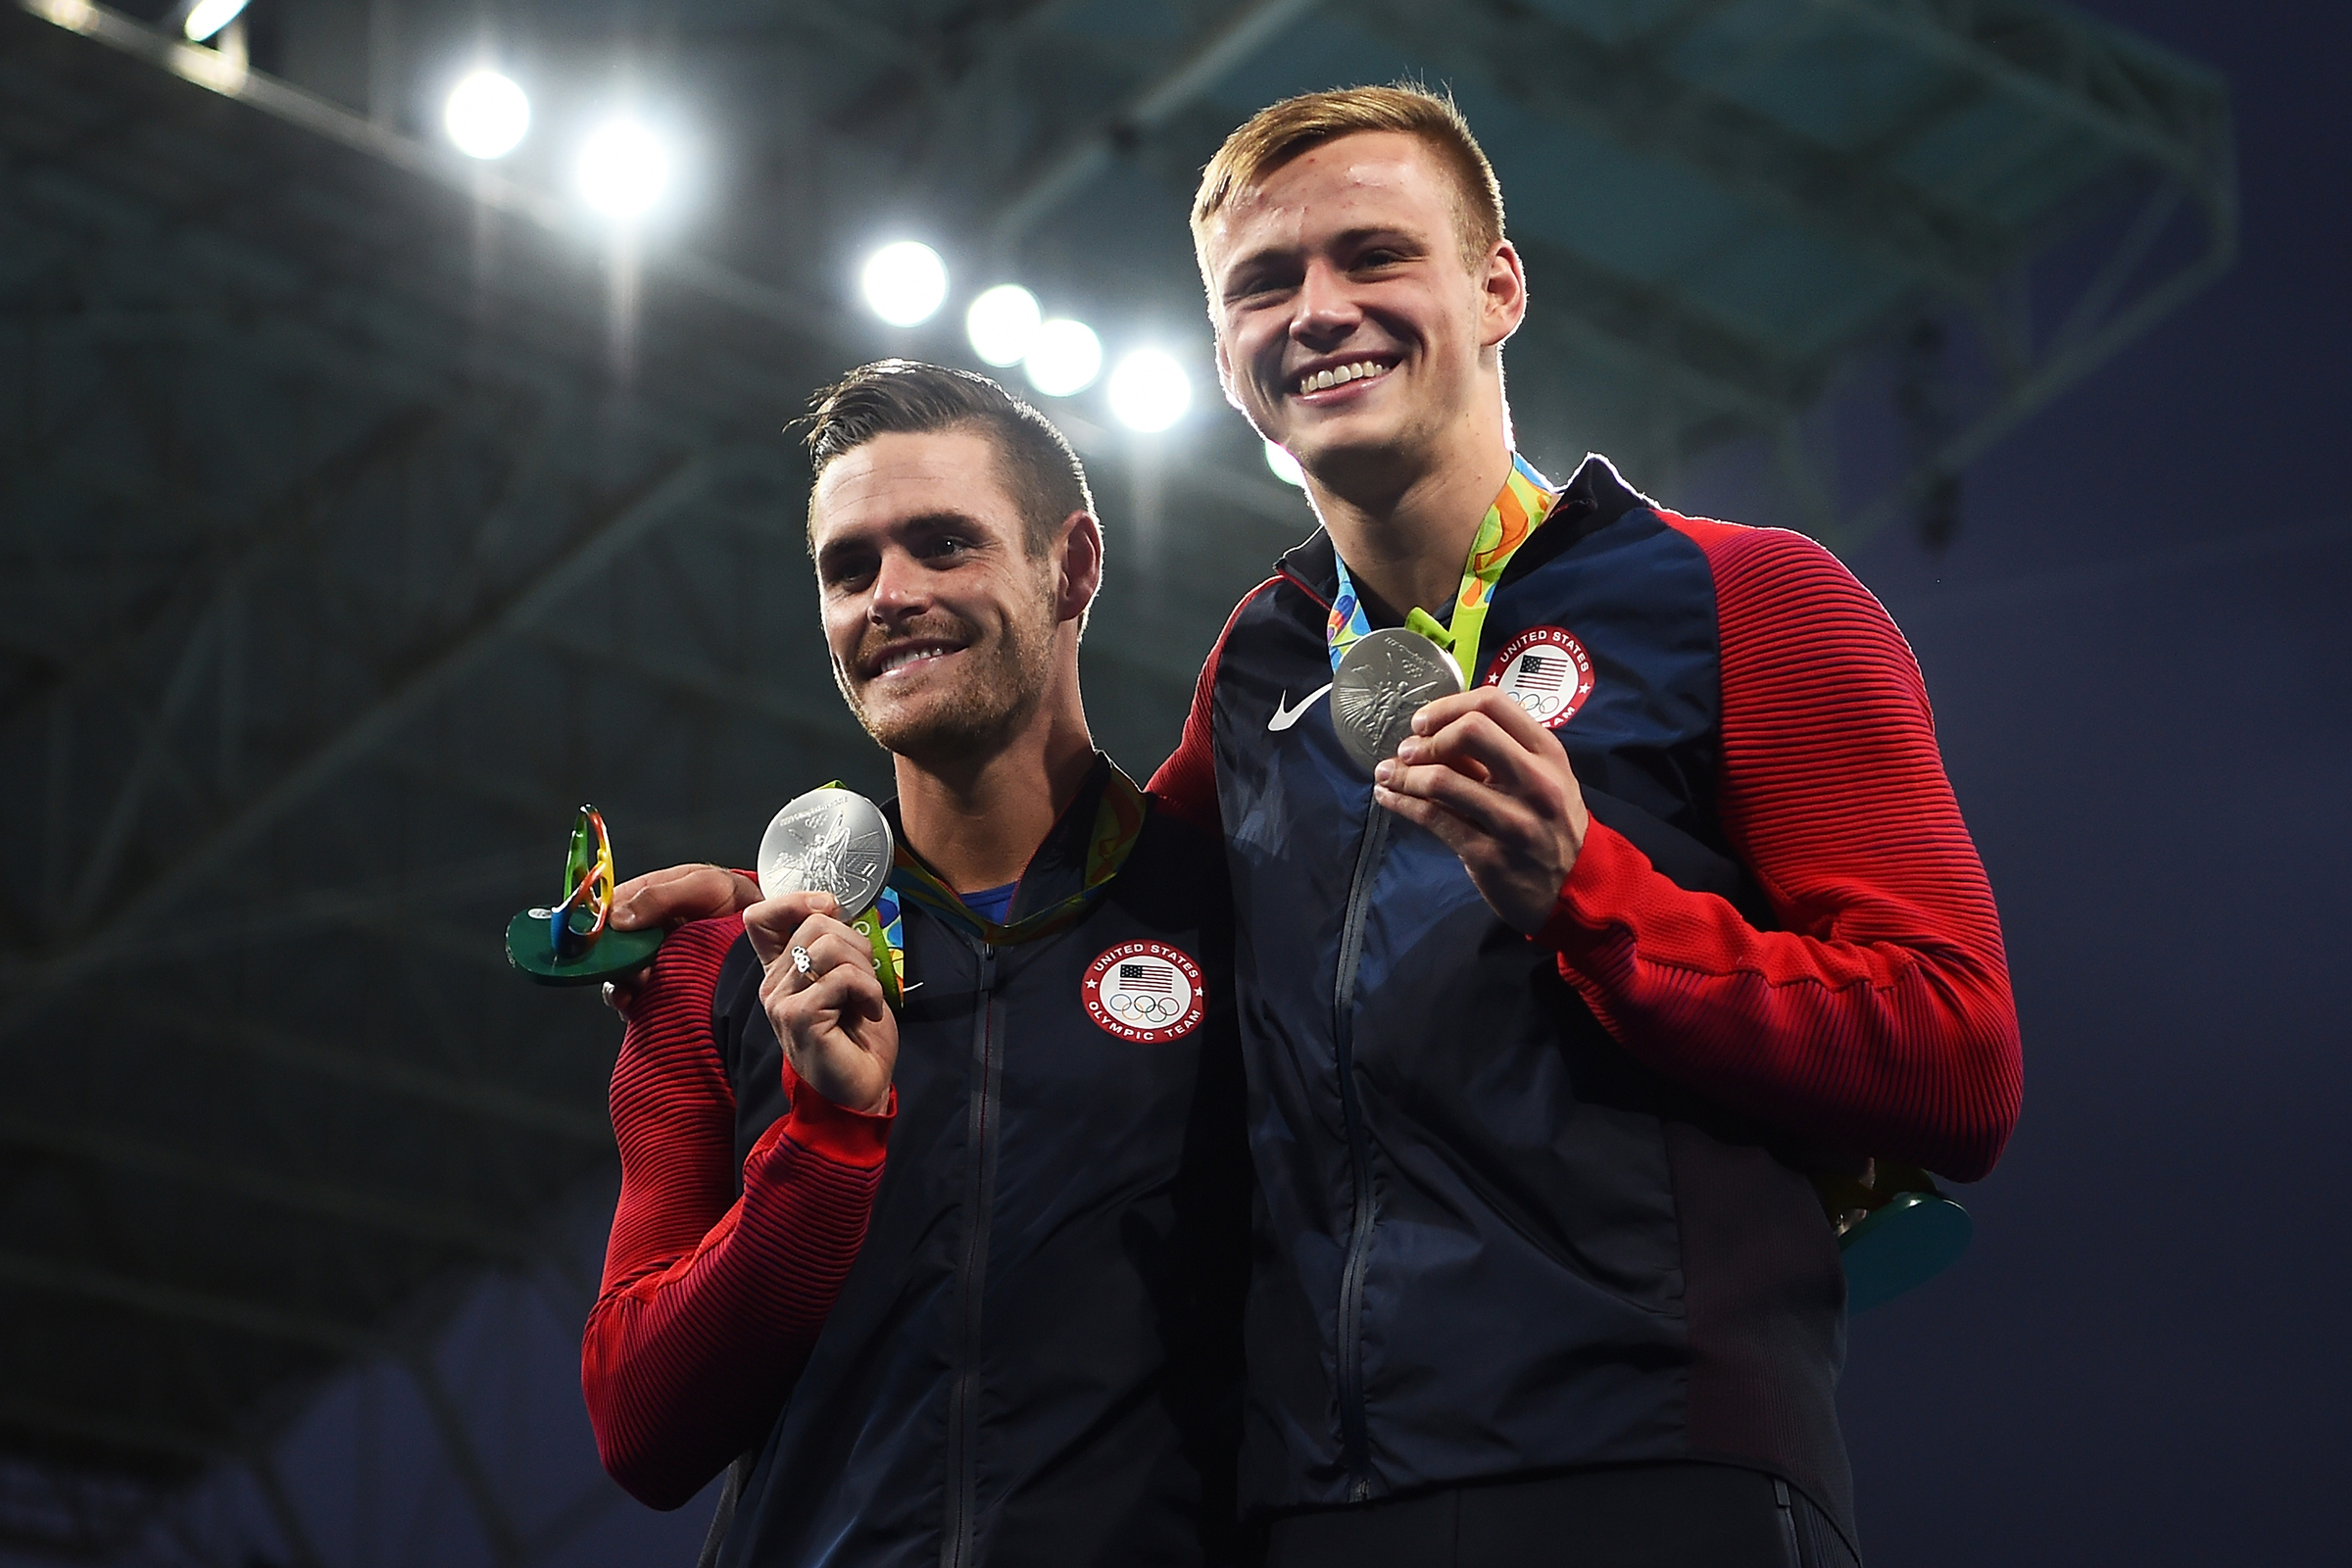 RIO DE JANEIRO, BRAZIL - AUGUST 08:  Silver medalists David Boudia and Steele Johnson of the United States pose during the medal ceremony for the Men's Diving Synchronised 10m Platform Final on Day 3 of the Rio 2016 Olympic Games at Maria Lenk Aquatics Centre on August 8, 2016 in Rio de Janeiro, Brazil.  (Photo by Laurence Griffiths/Getty Images)